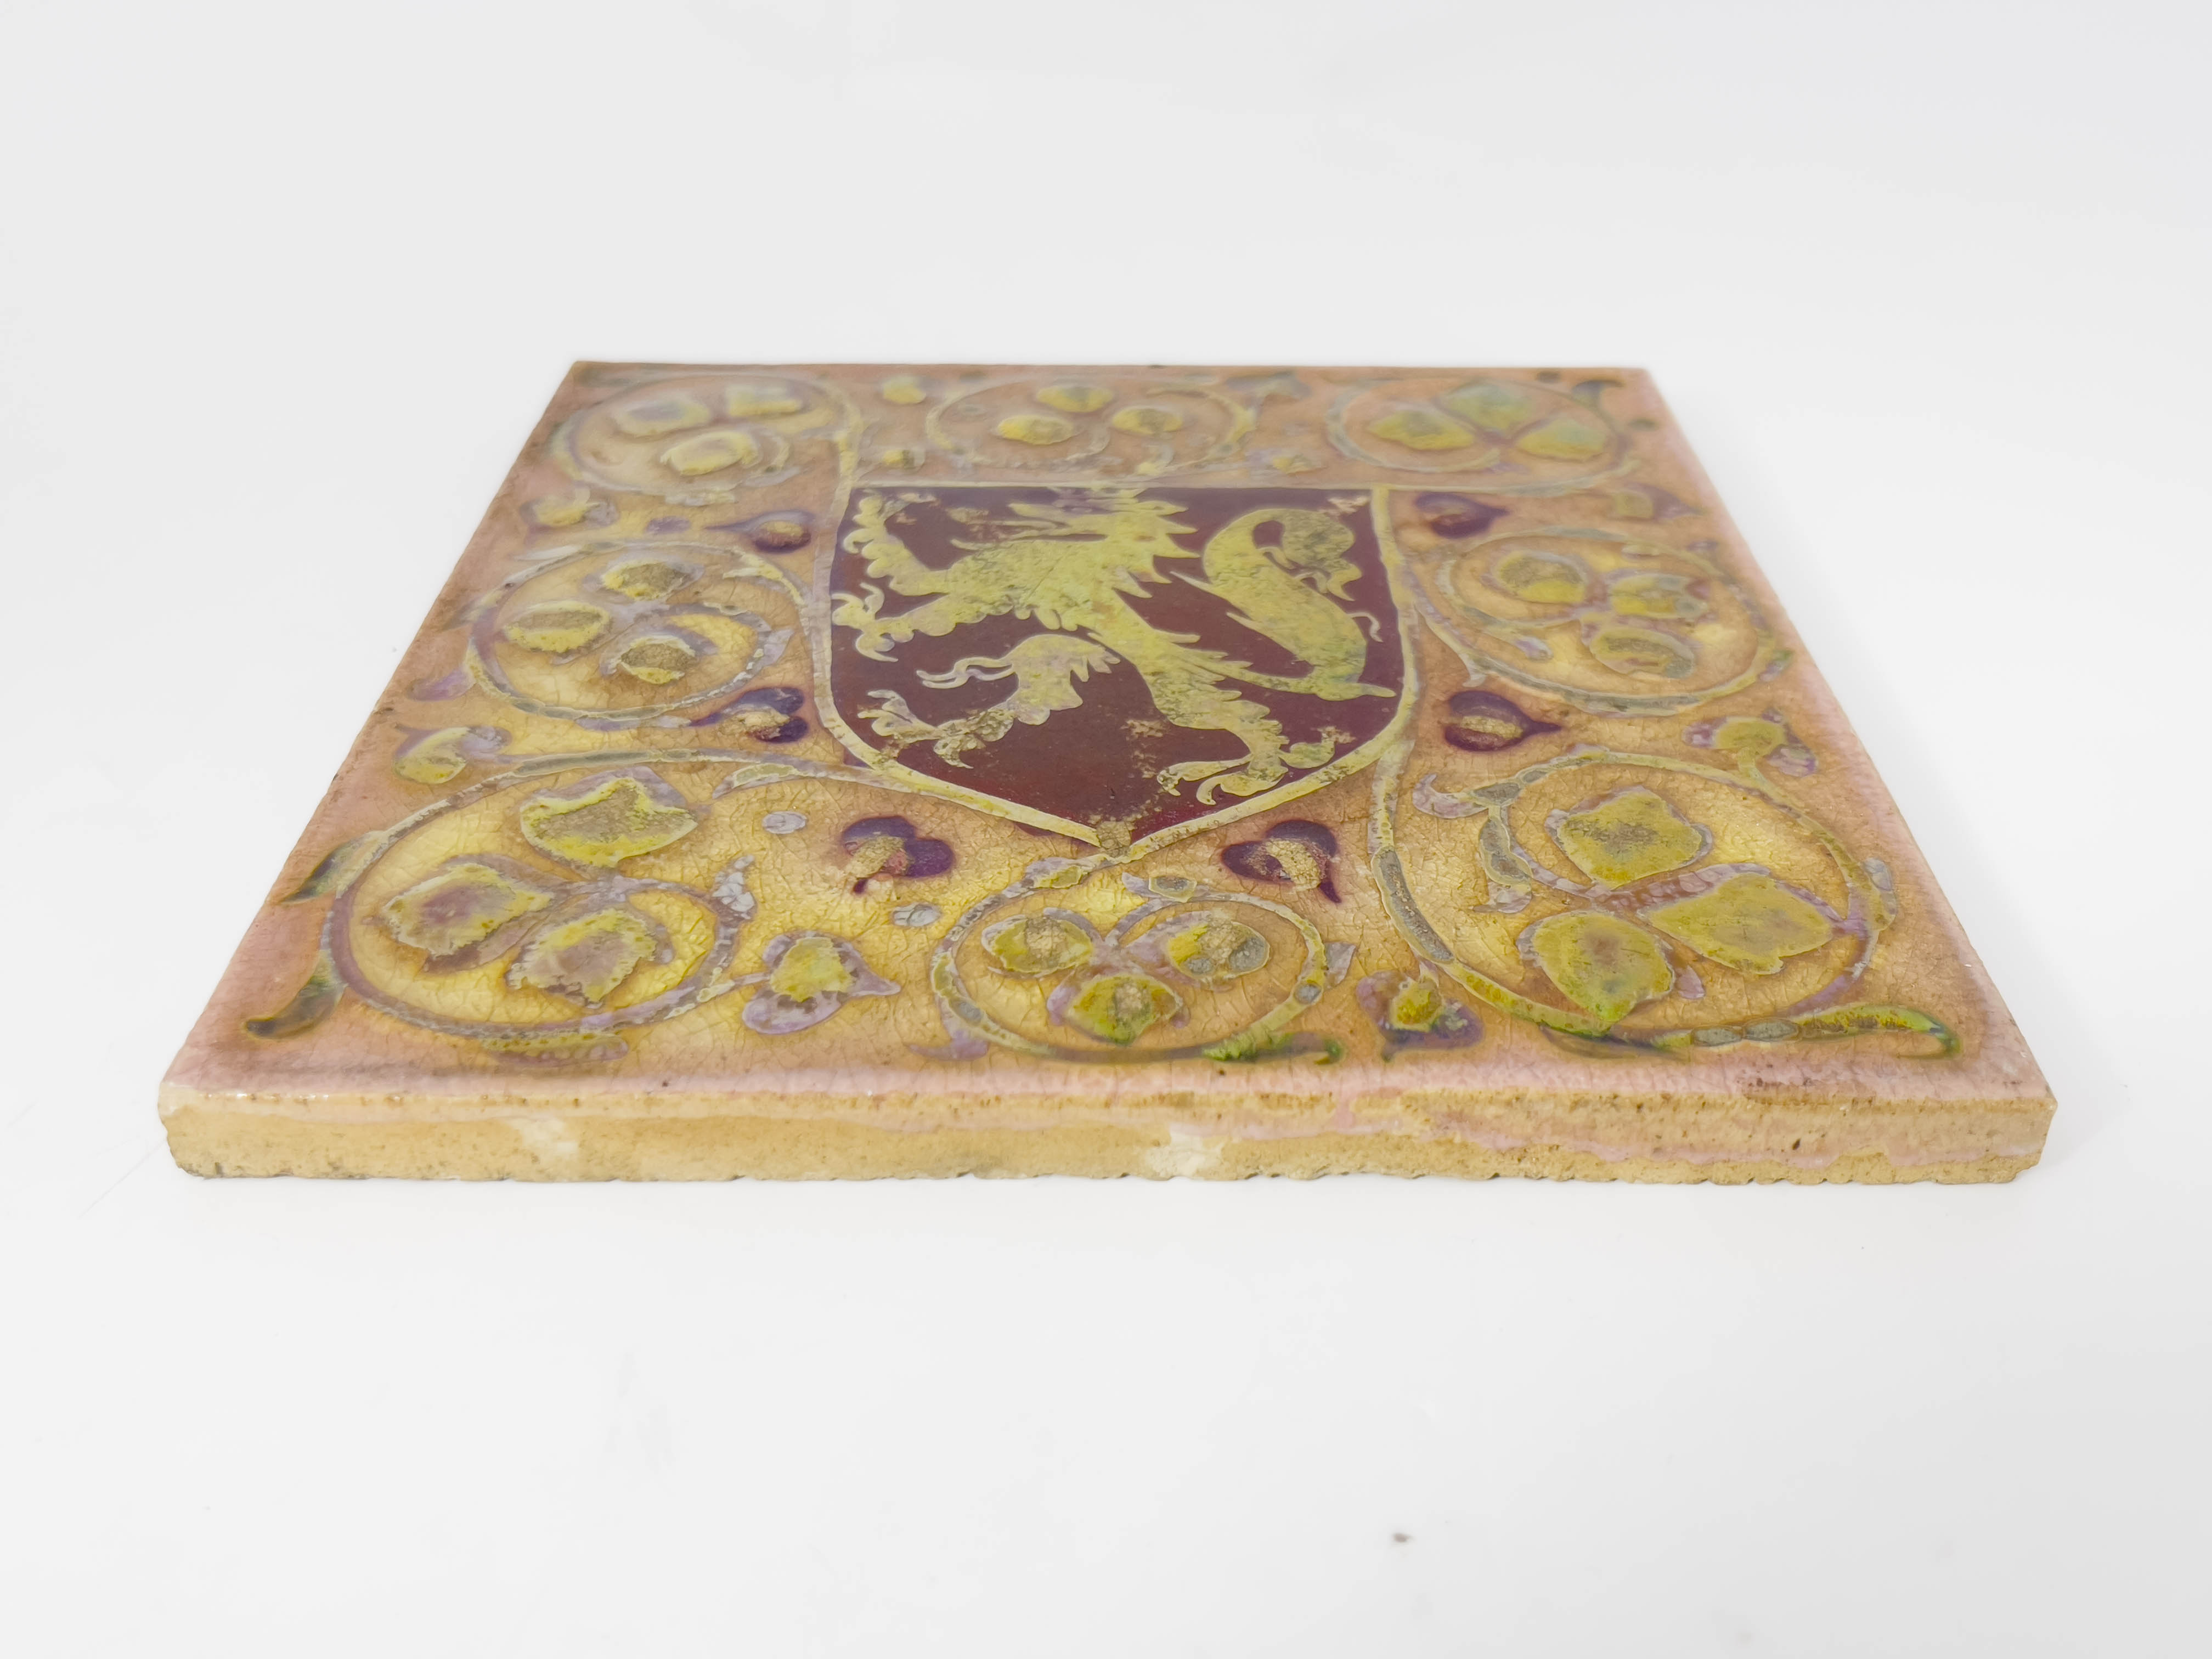 Pilkington, a Royal Lancastrian relief moulded heraldic lustre tile, painted with a red shield - Image 2 of 3